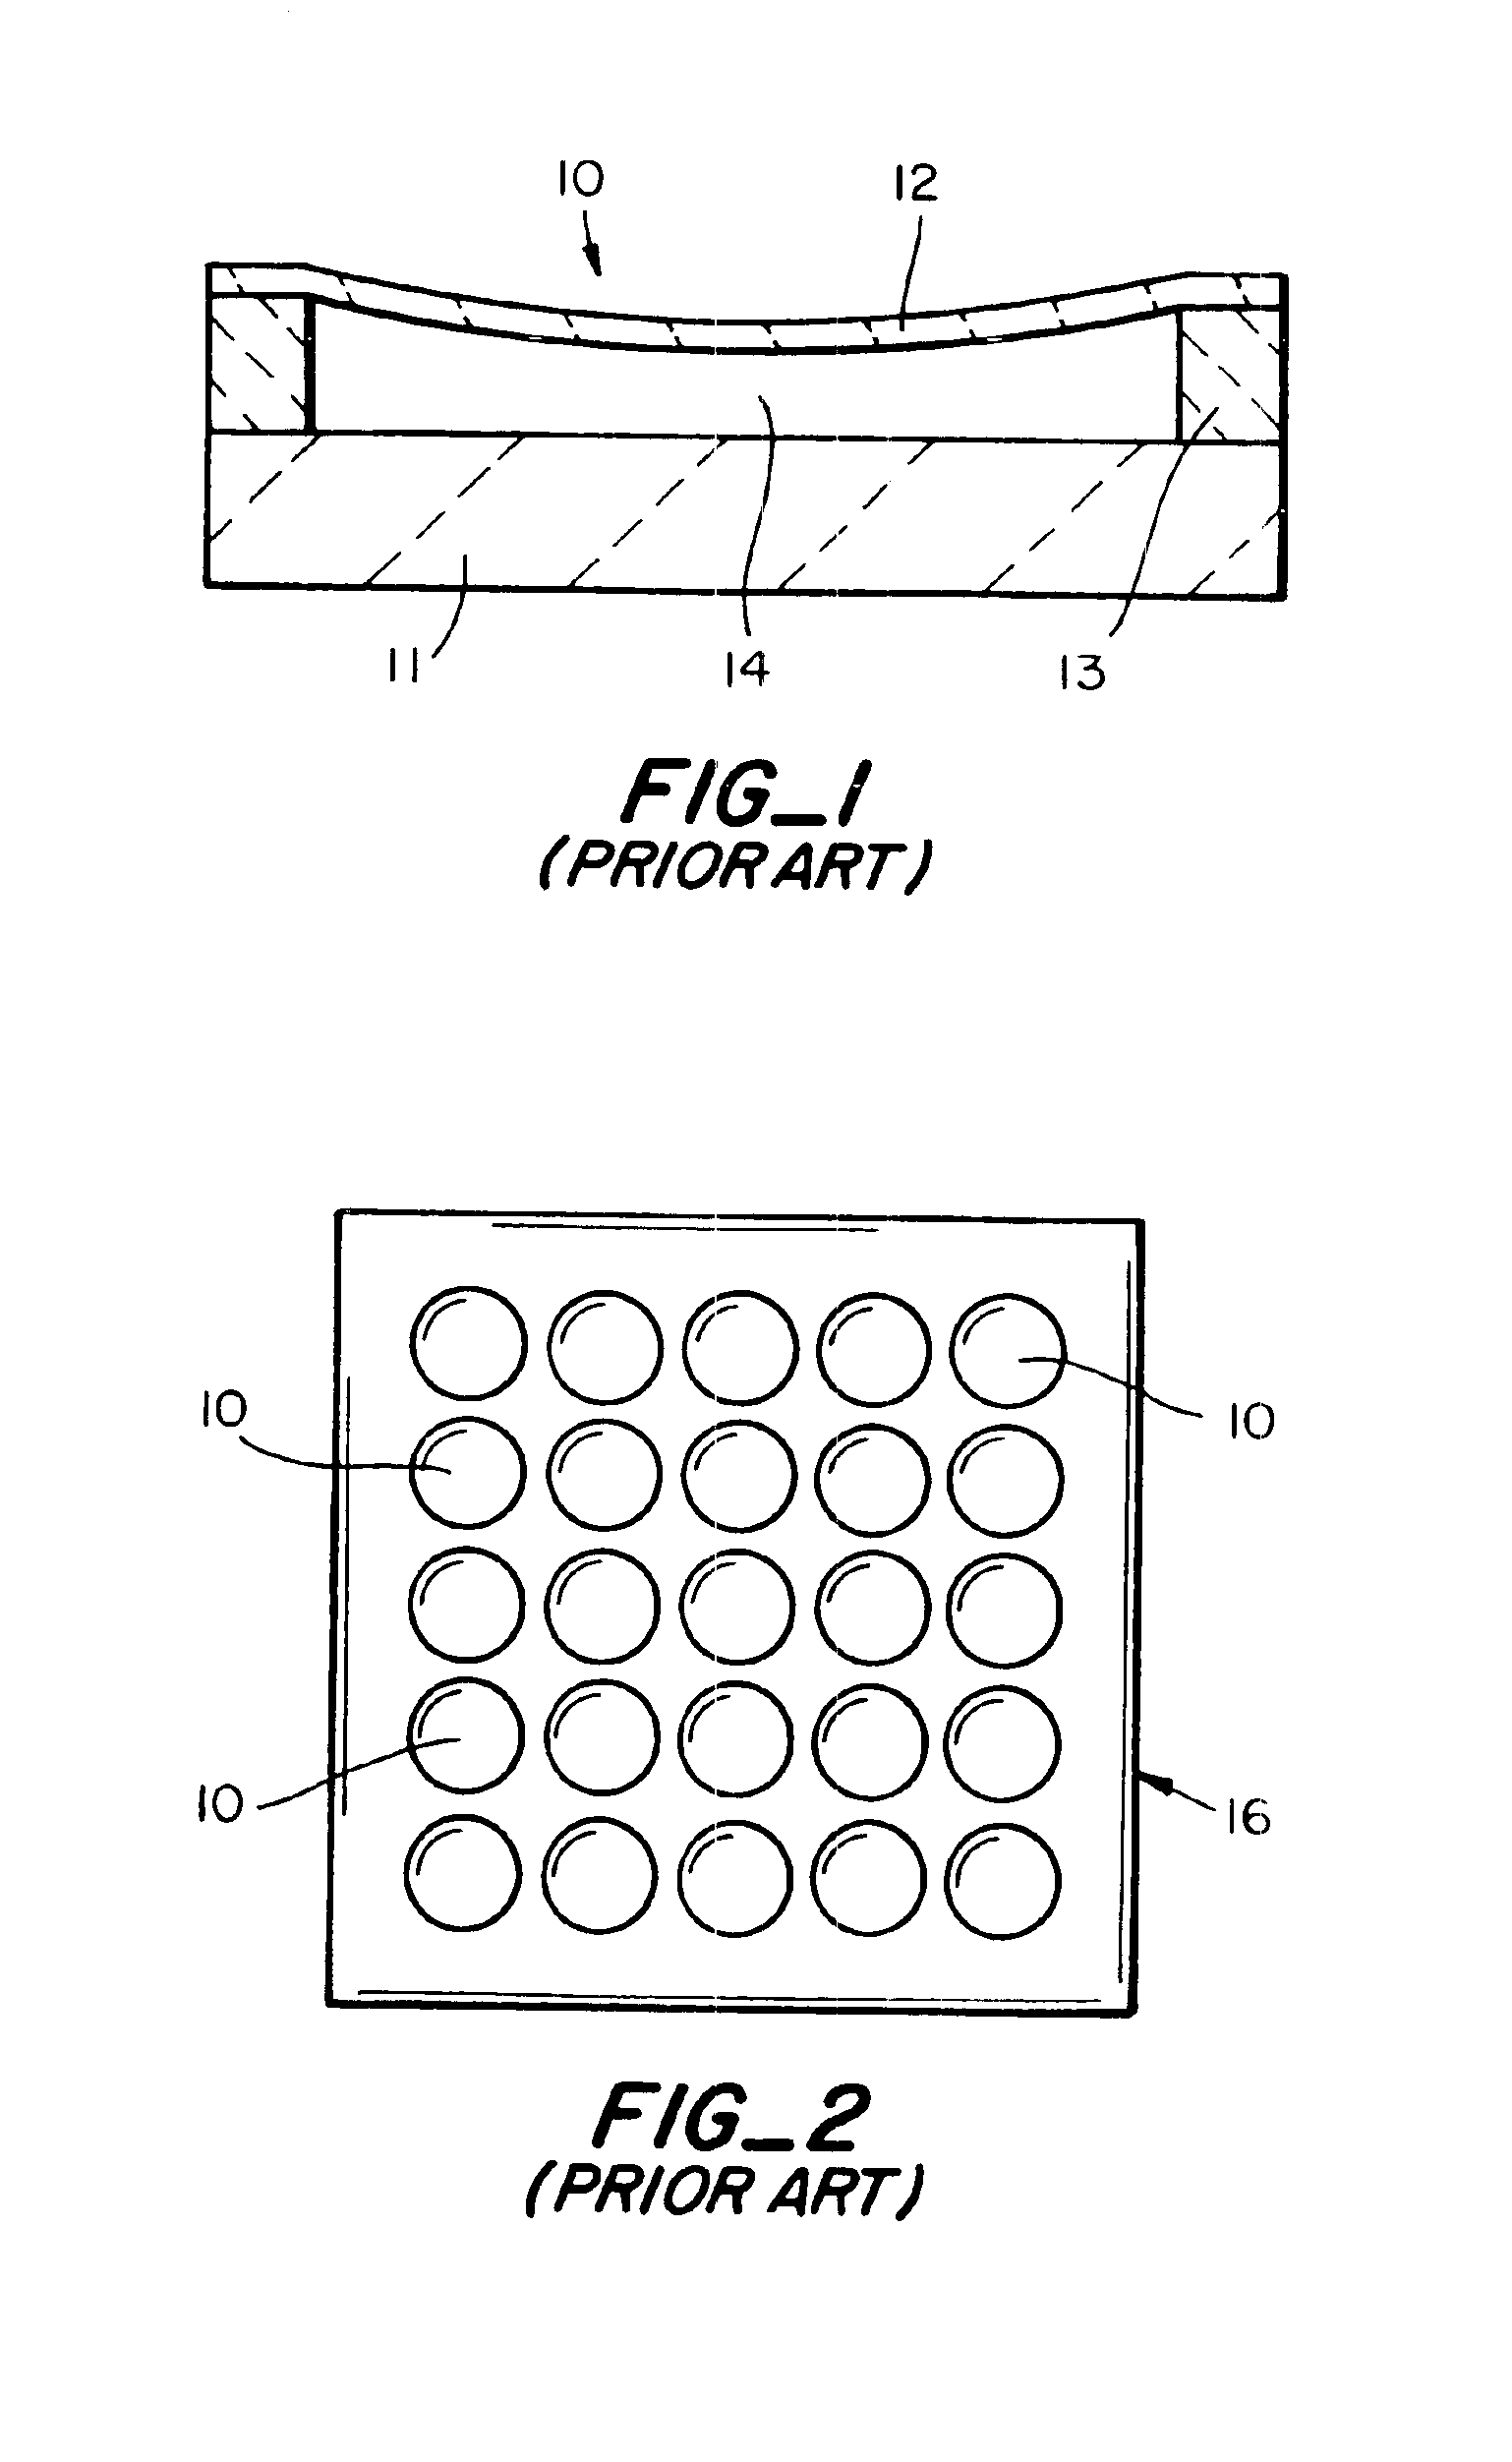 Fluidic device with integrated capacitive micromachined ultrasonic transducers